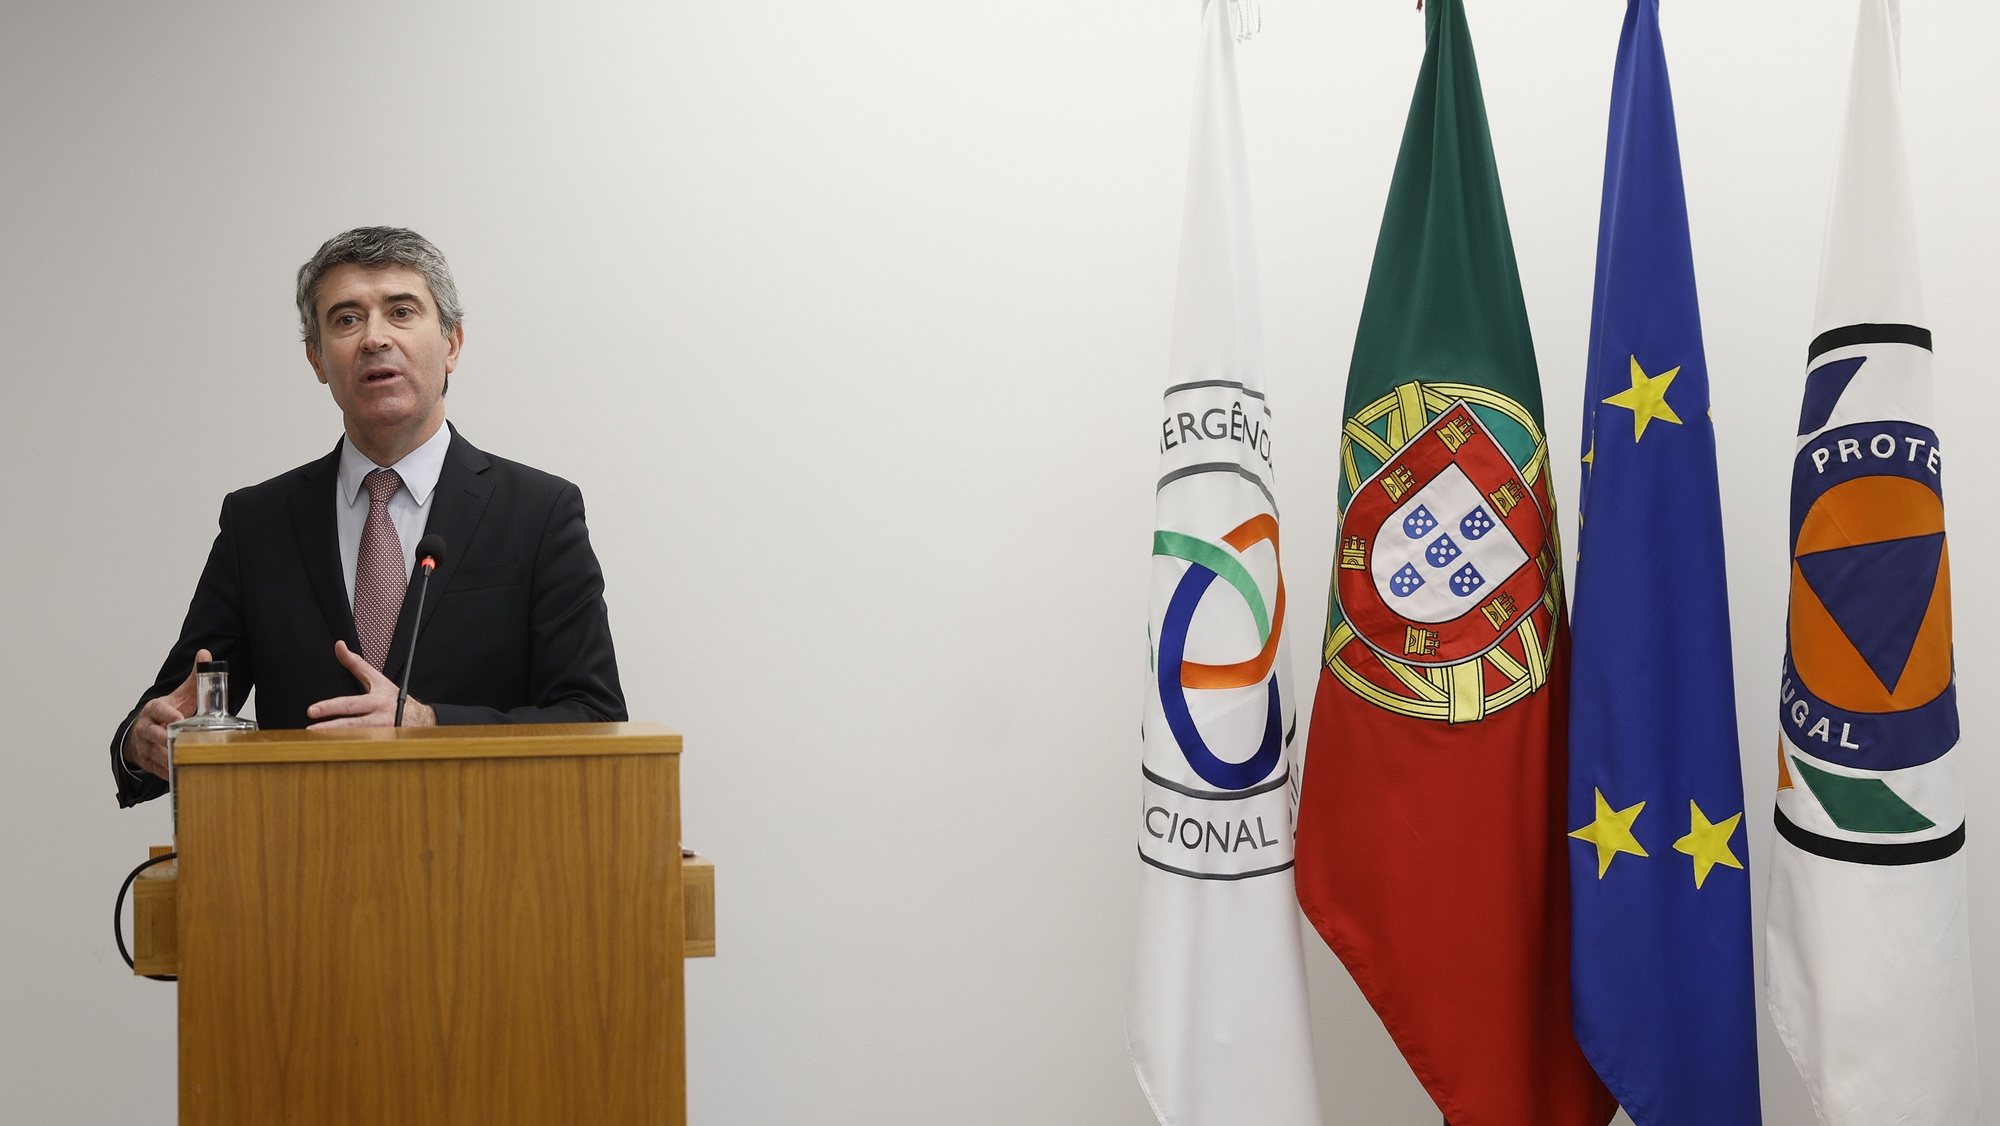 Portuguese Minister of Internal Affairs Jose Luis Carneiro attends a press conference after the “European Civil Protection Mechanism’s 2022 Wildfire Season Lessons Learned Programme” in Lisbon, Portugal, 10 January 2023. ANTONIO PEDRO SANTOS/LUSA